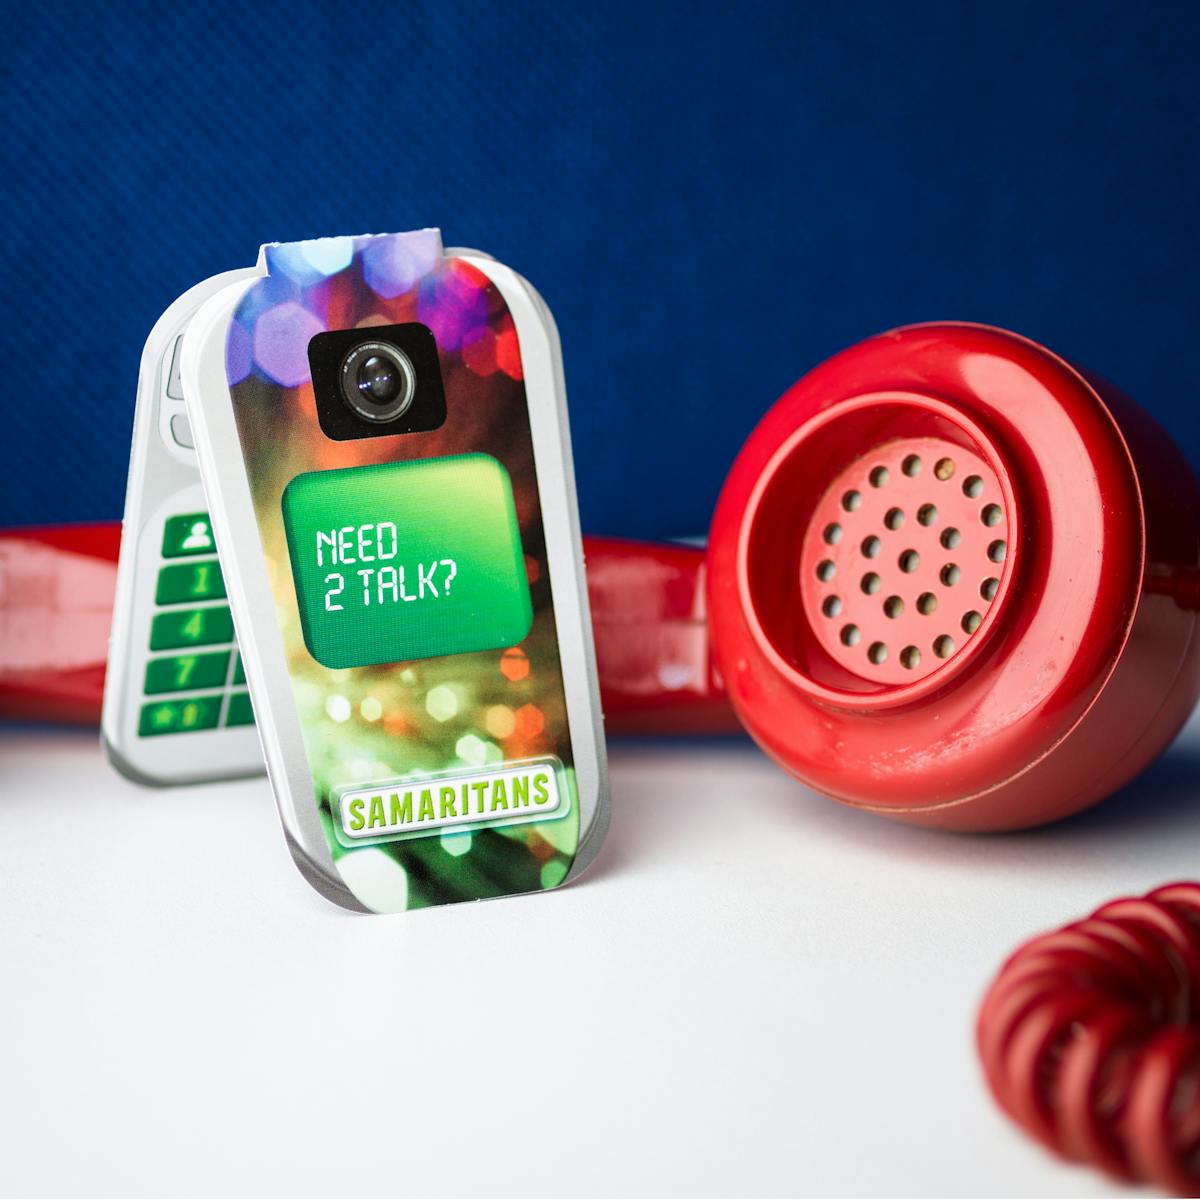 Photograph of an old red rotary phone receiver lying on its side on a white desk. Behind it is a blue felt desk back. between the earpiece and the mouthpiece is a Samaritans counseling service information leaflet in the shape of a flip mobile phone. on the front is written, 'Need 2 talk?'.